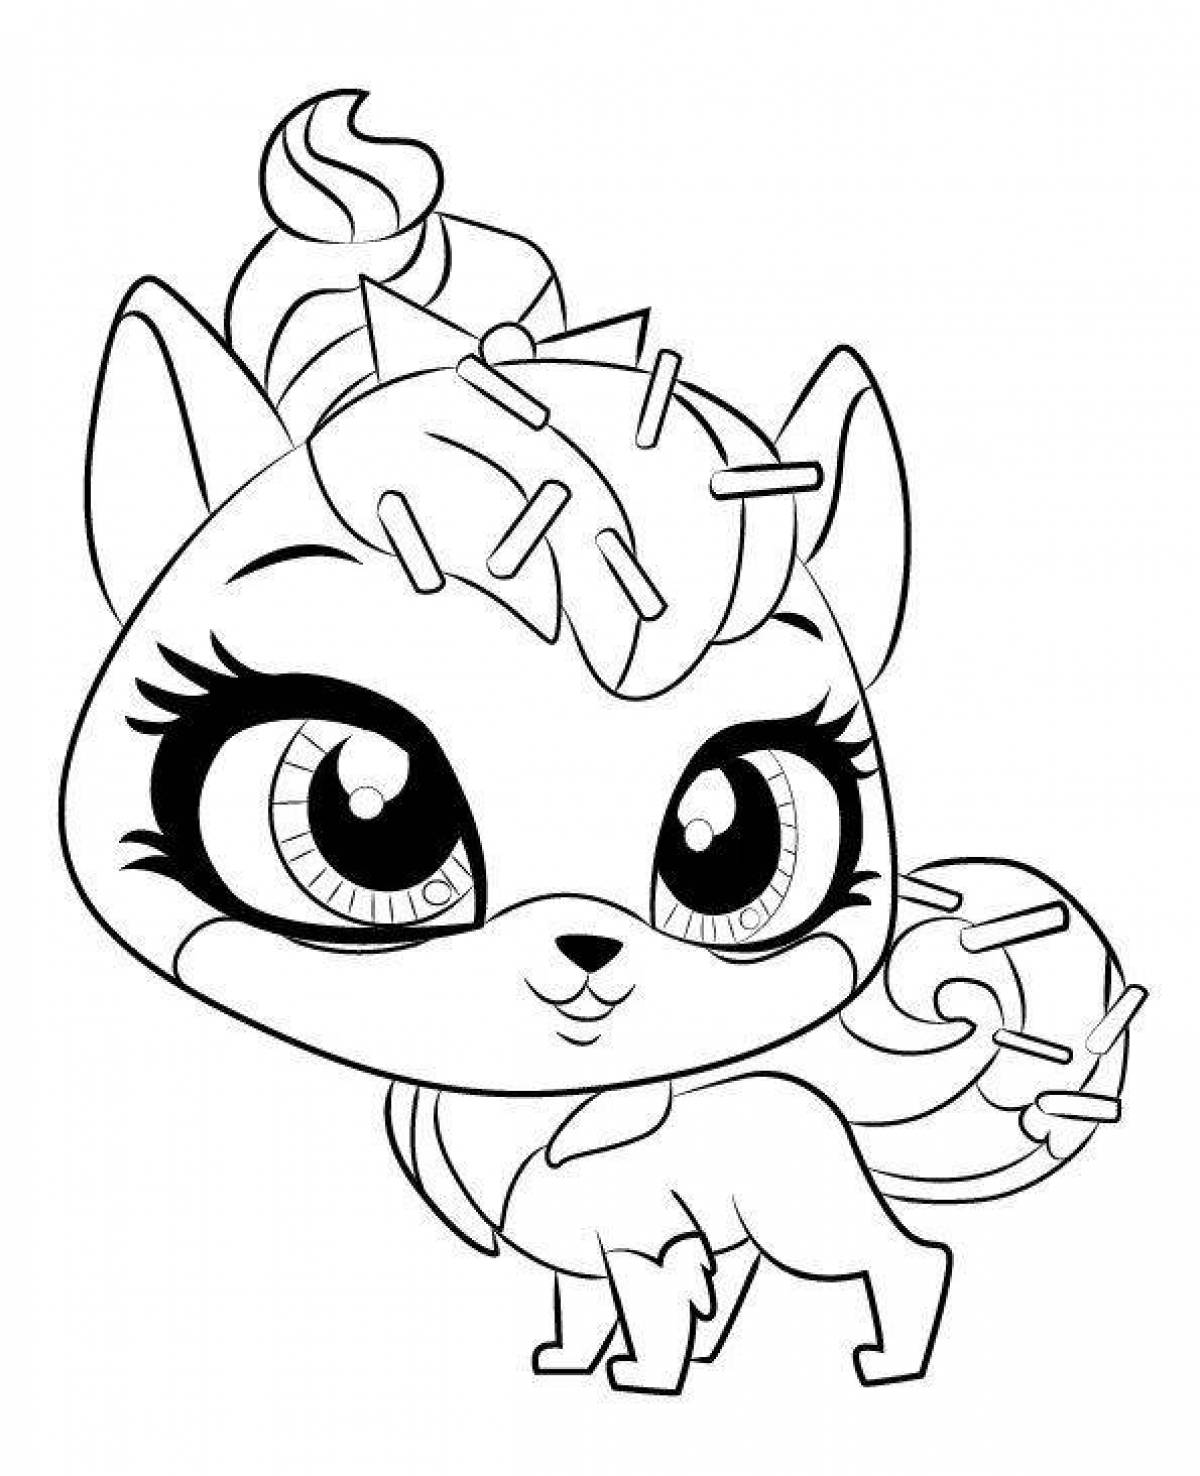 Comic lps coloring page